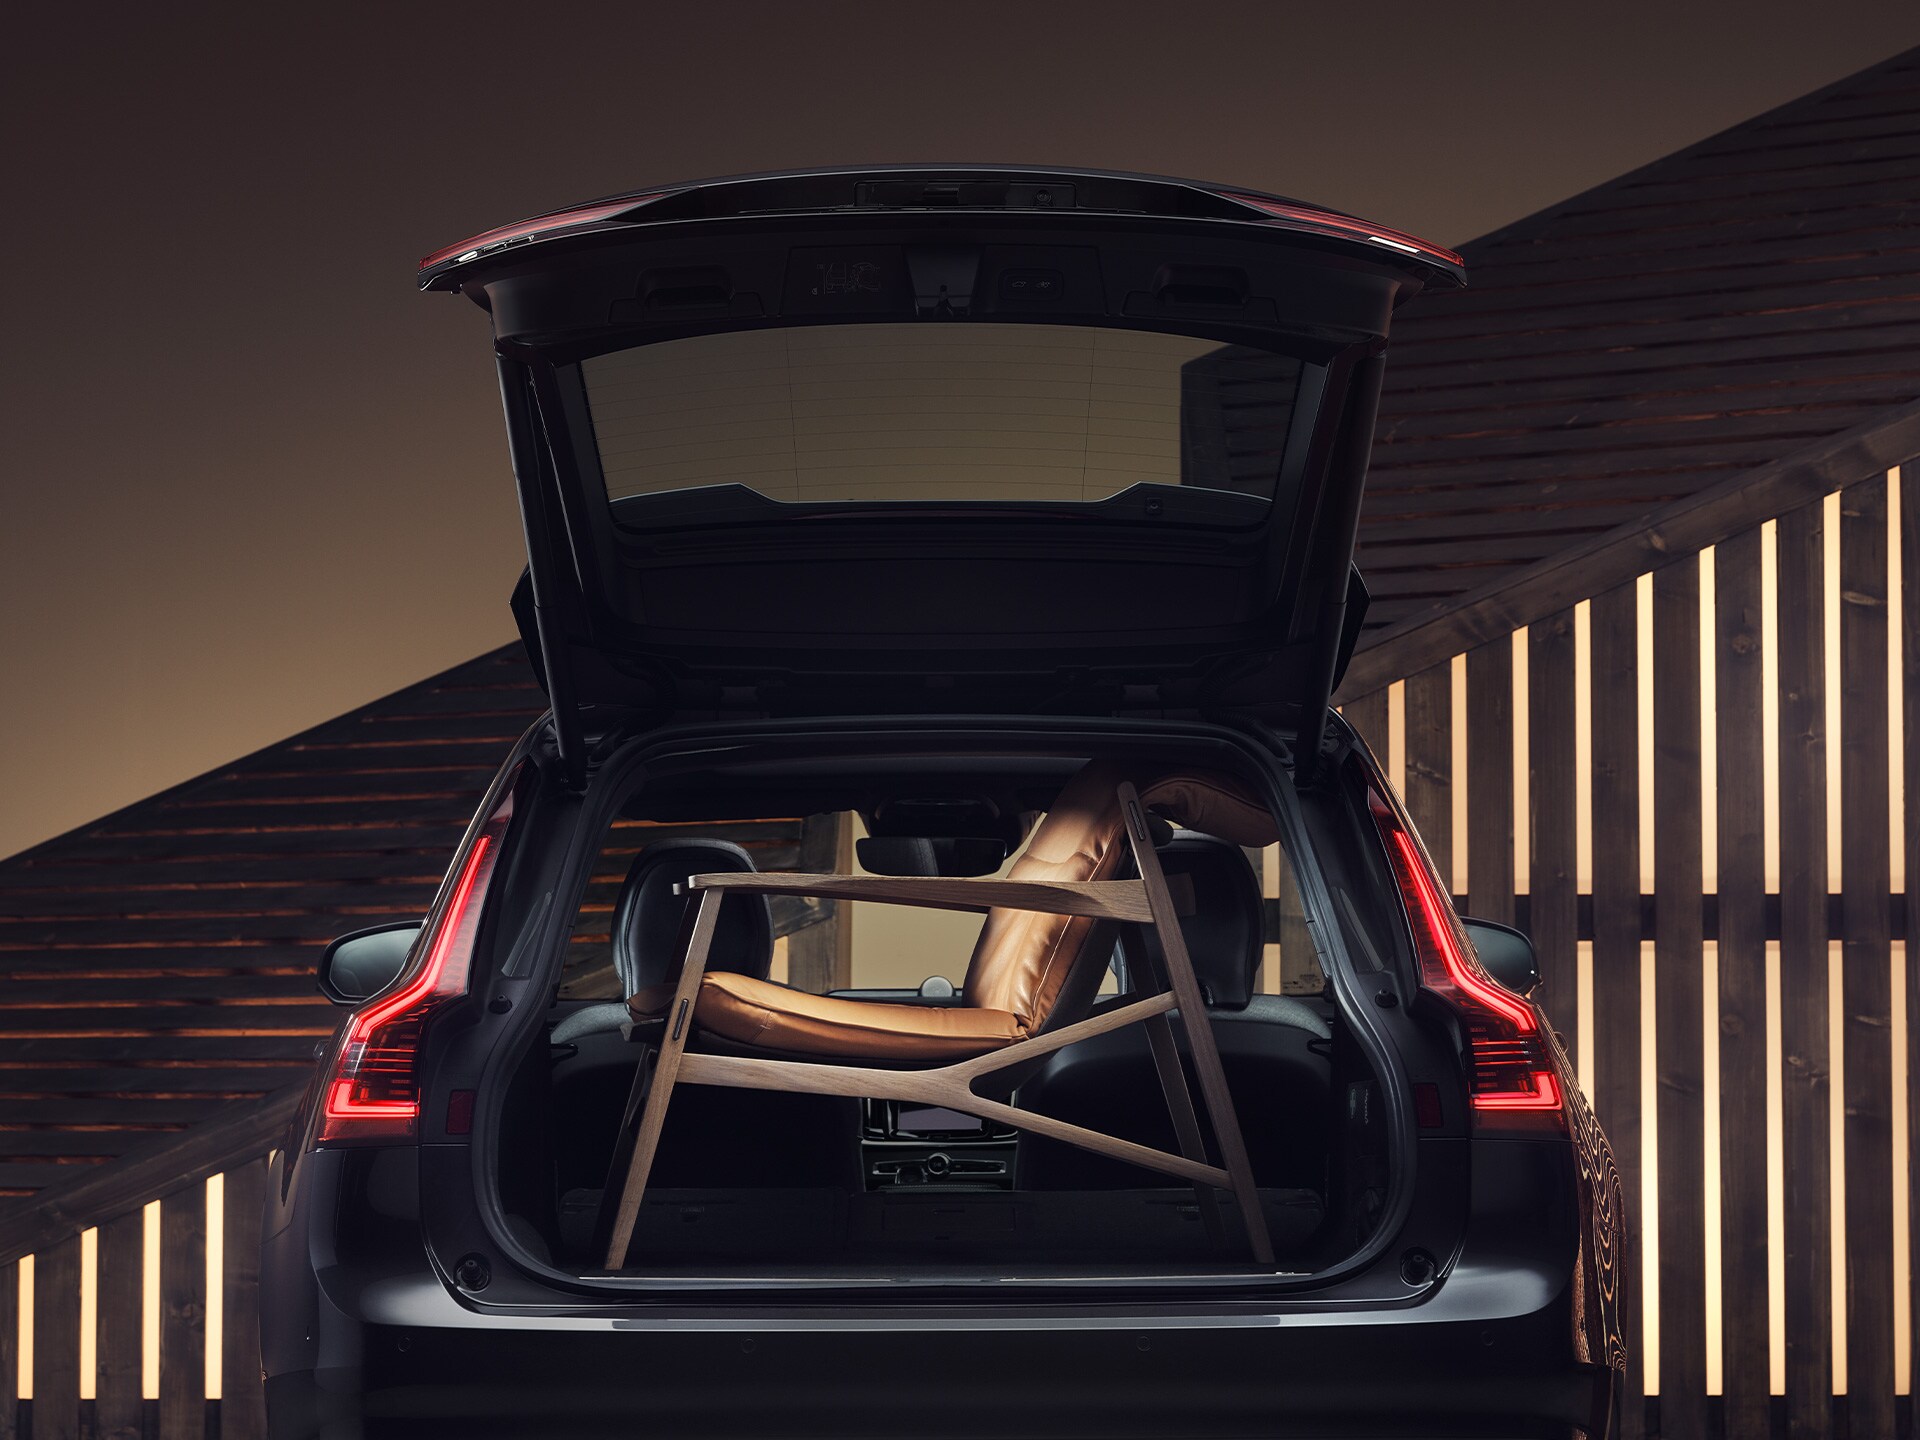 Versatile loading and seating options and roomy design in a Volvo V90 estate.